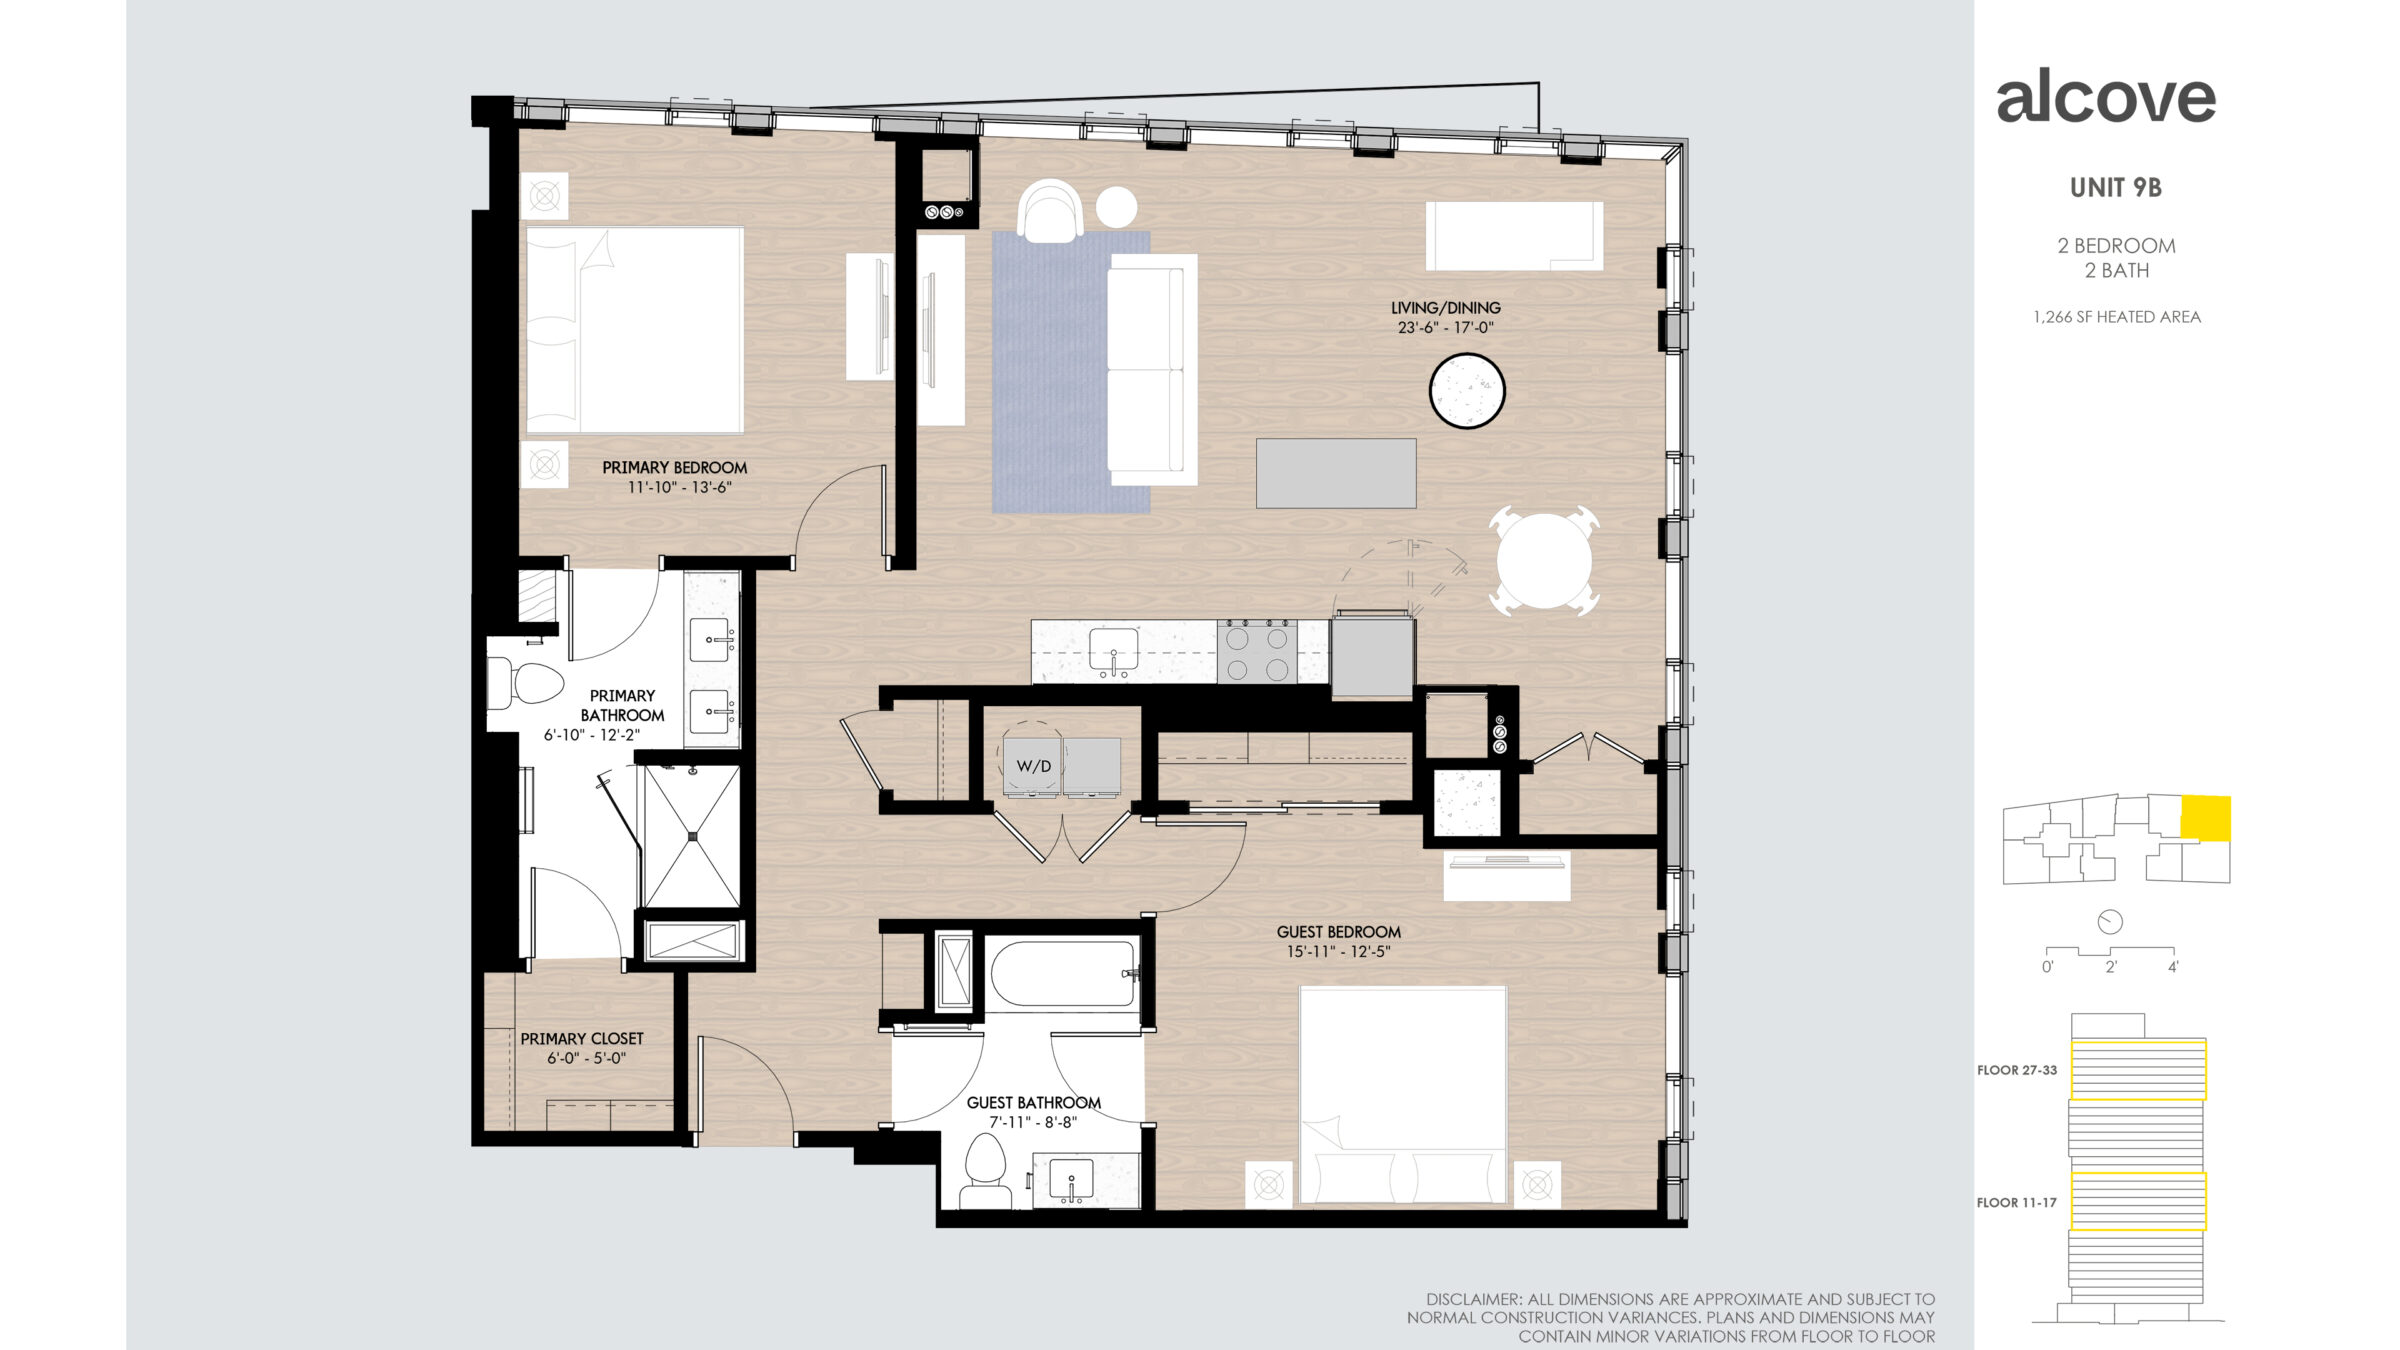 UNIT 9B 2 BEDROOM 2 BATH 1,266 SF HEATED AREA Floor 27-33 Floor 11-17 Disclaimer: all dimensions are approximate and subject to normal construction variances. Plans and dimensions may contain minor variations from floor to floor.